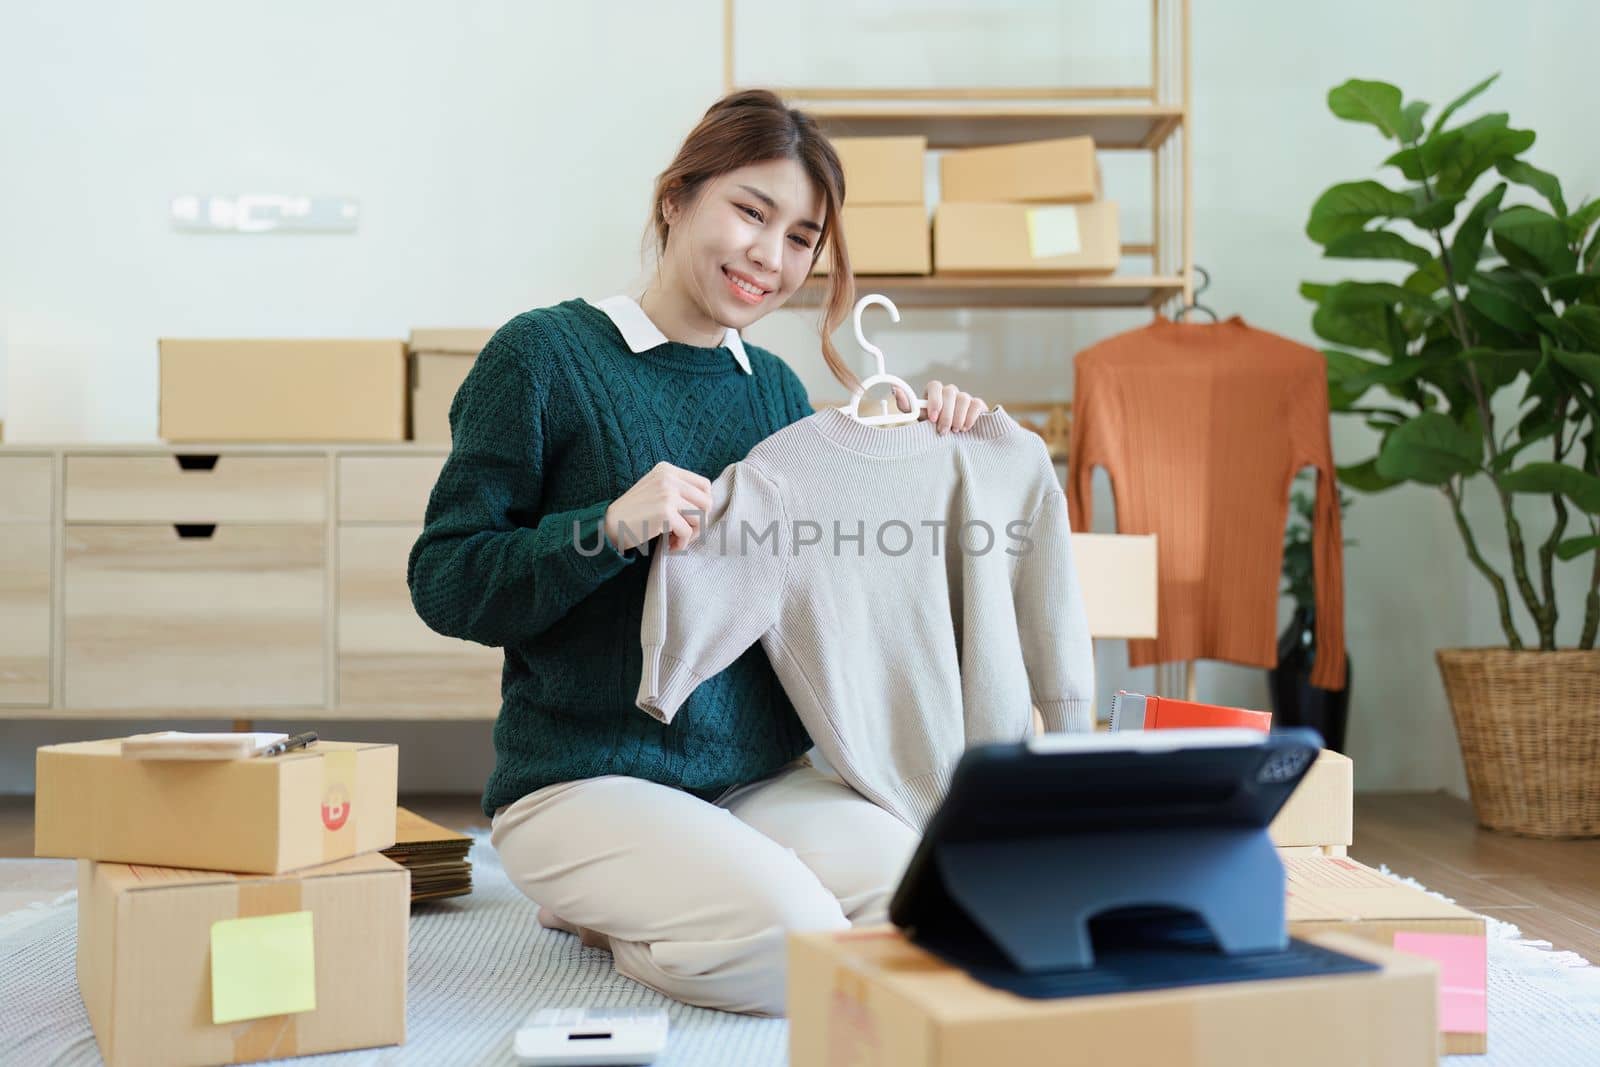 Starting small business entrepreneur of independent young Asian woman online seller using a tablet computer showing products to a customer before making a purchase decision. SME delivery concept.